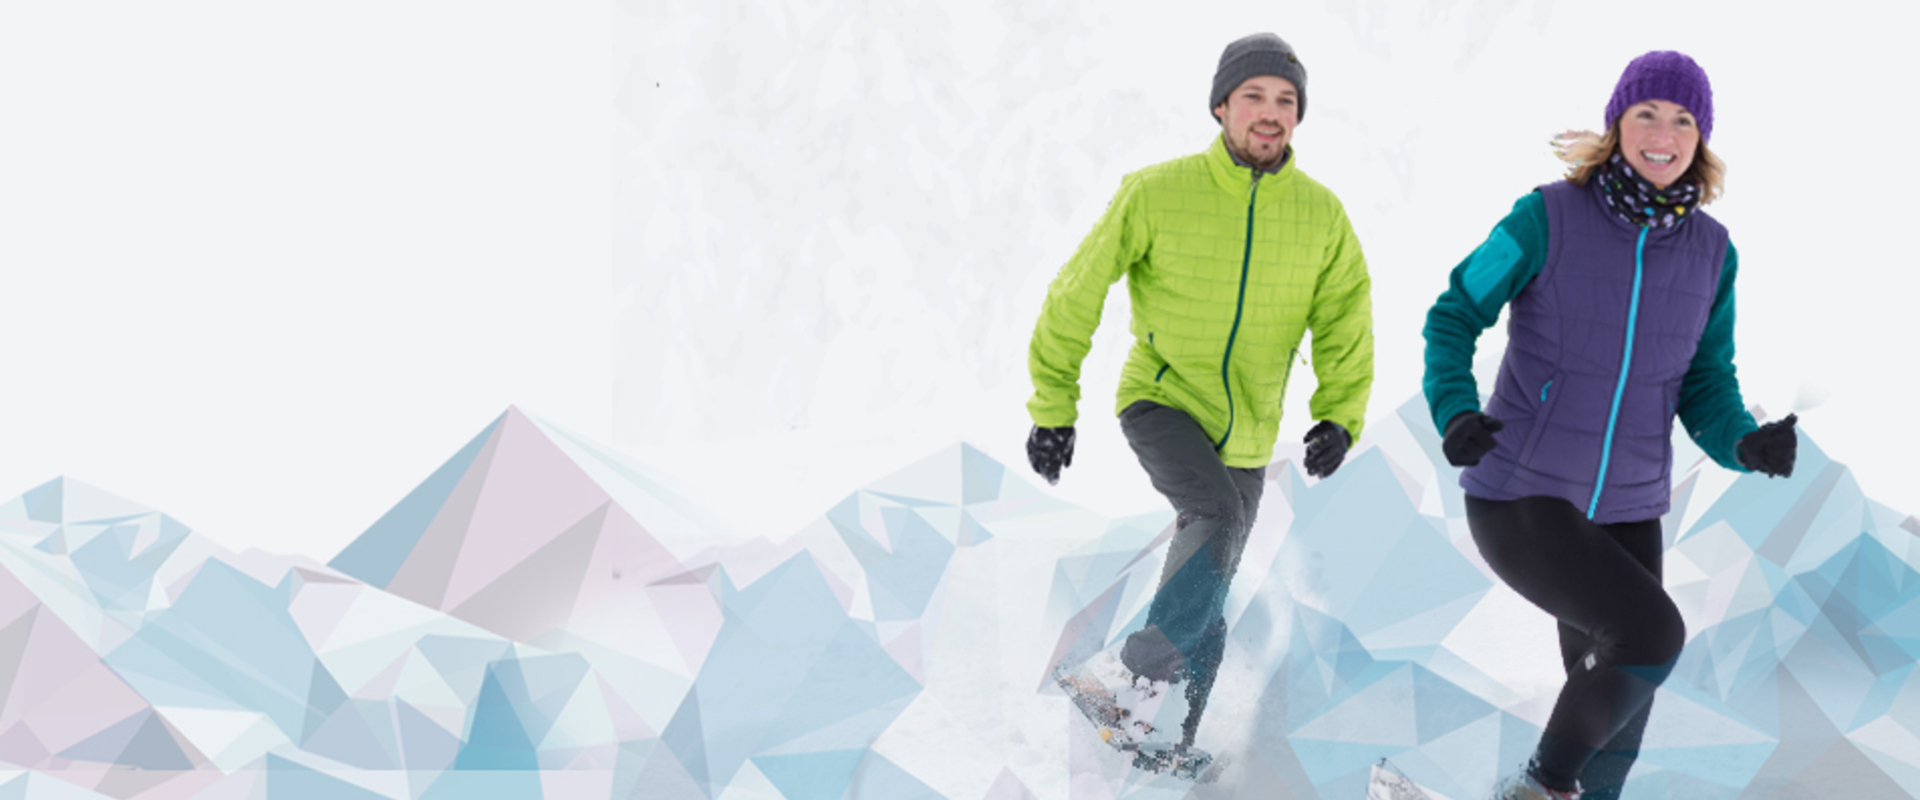 Join us on February 24 for the Snowshoe Grind Mountain Run, in support of jack.org.